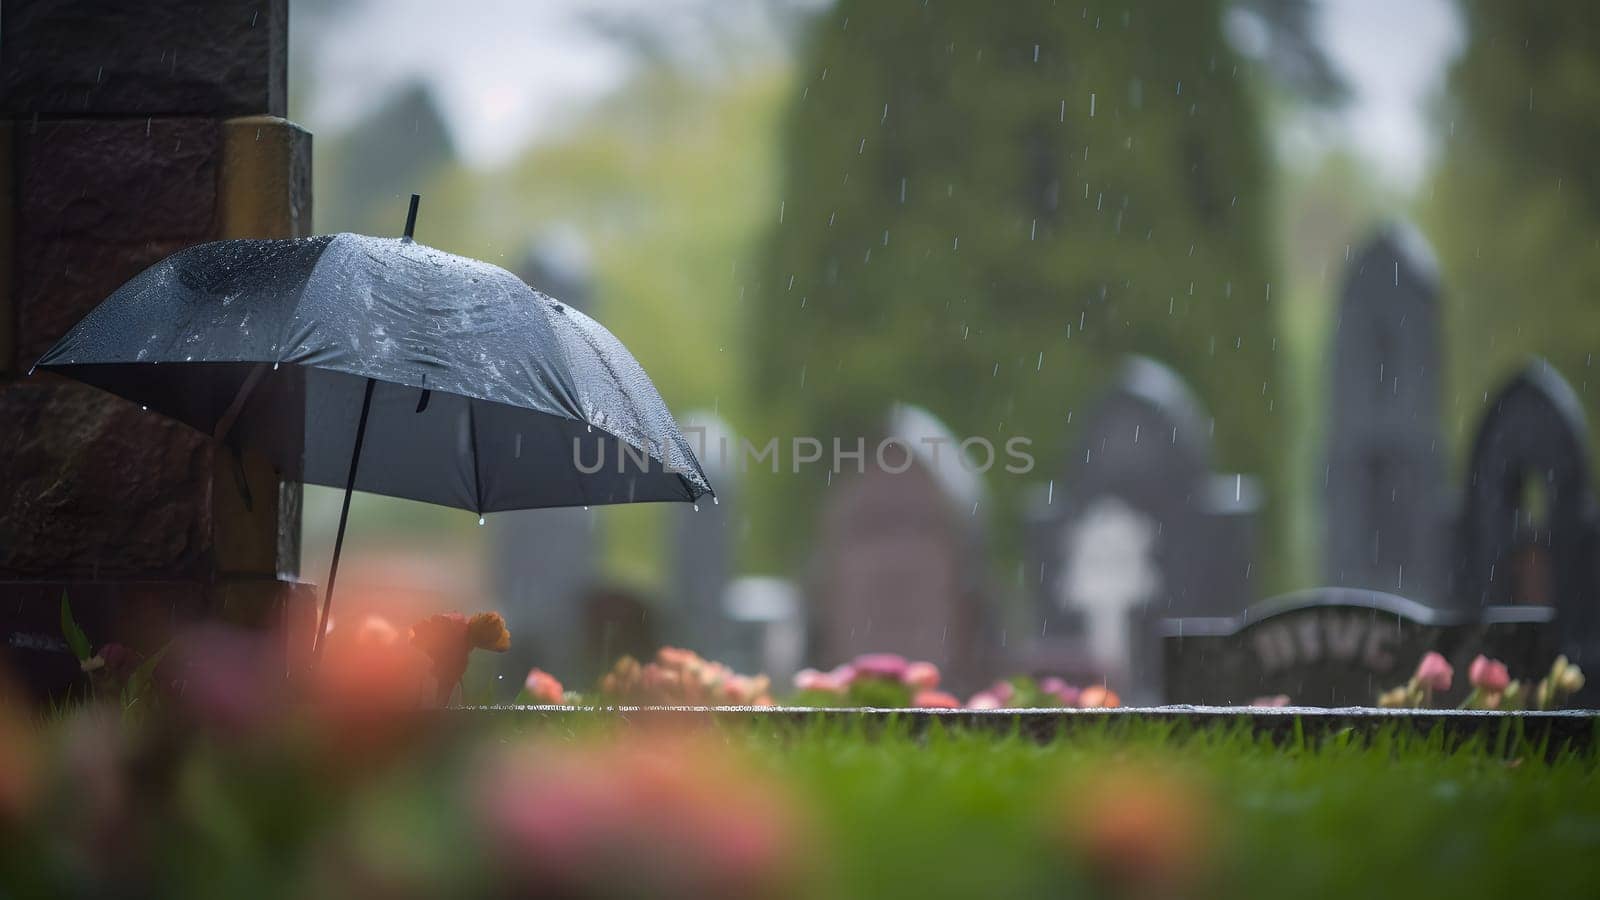 rainy funeral with bokeh, neural network generated photorealistic image by z1b